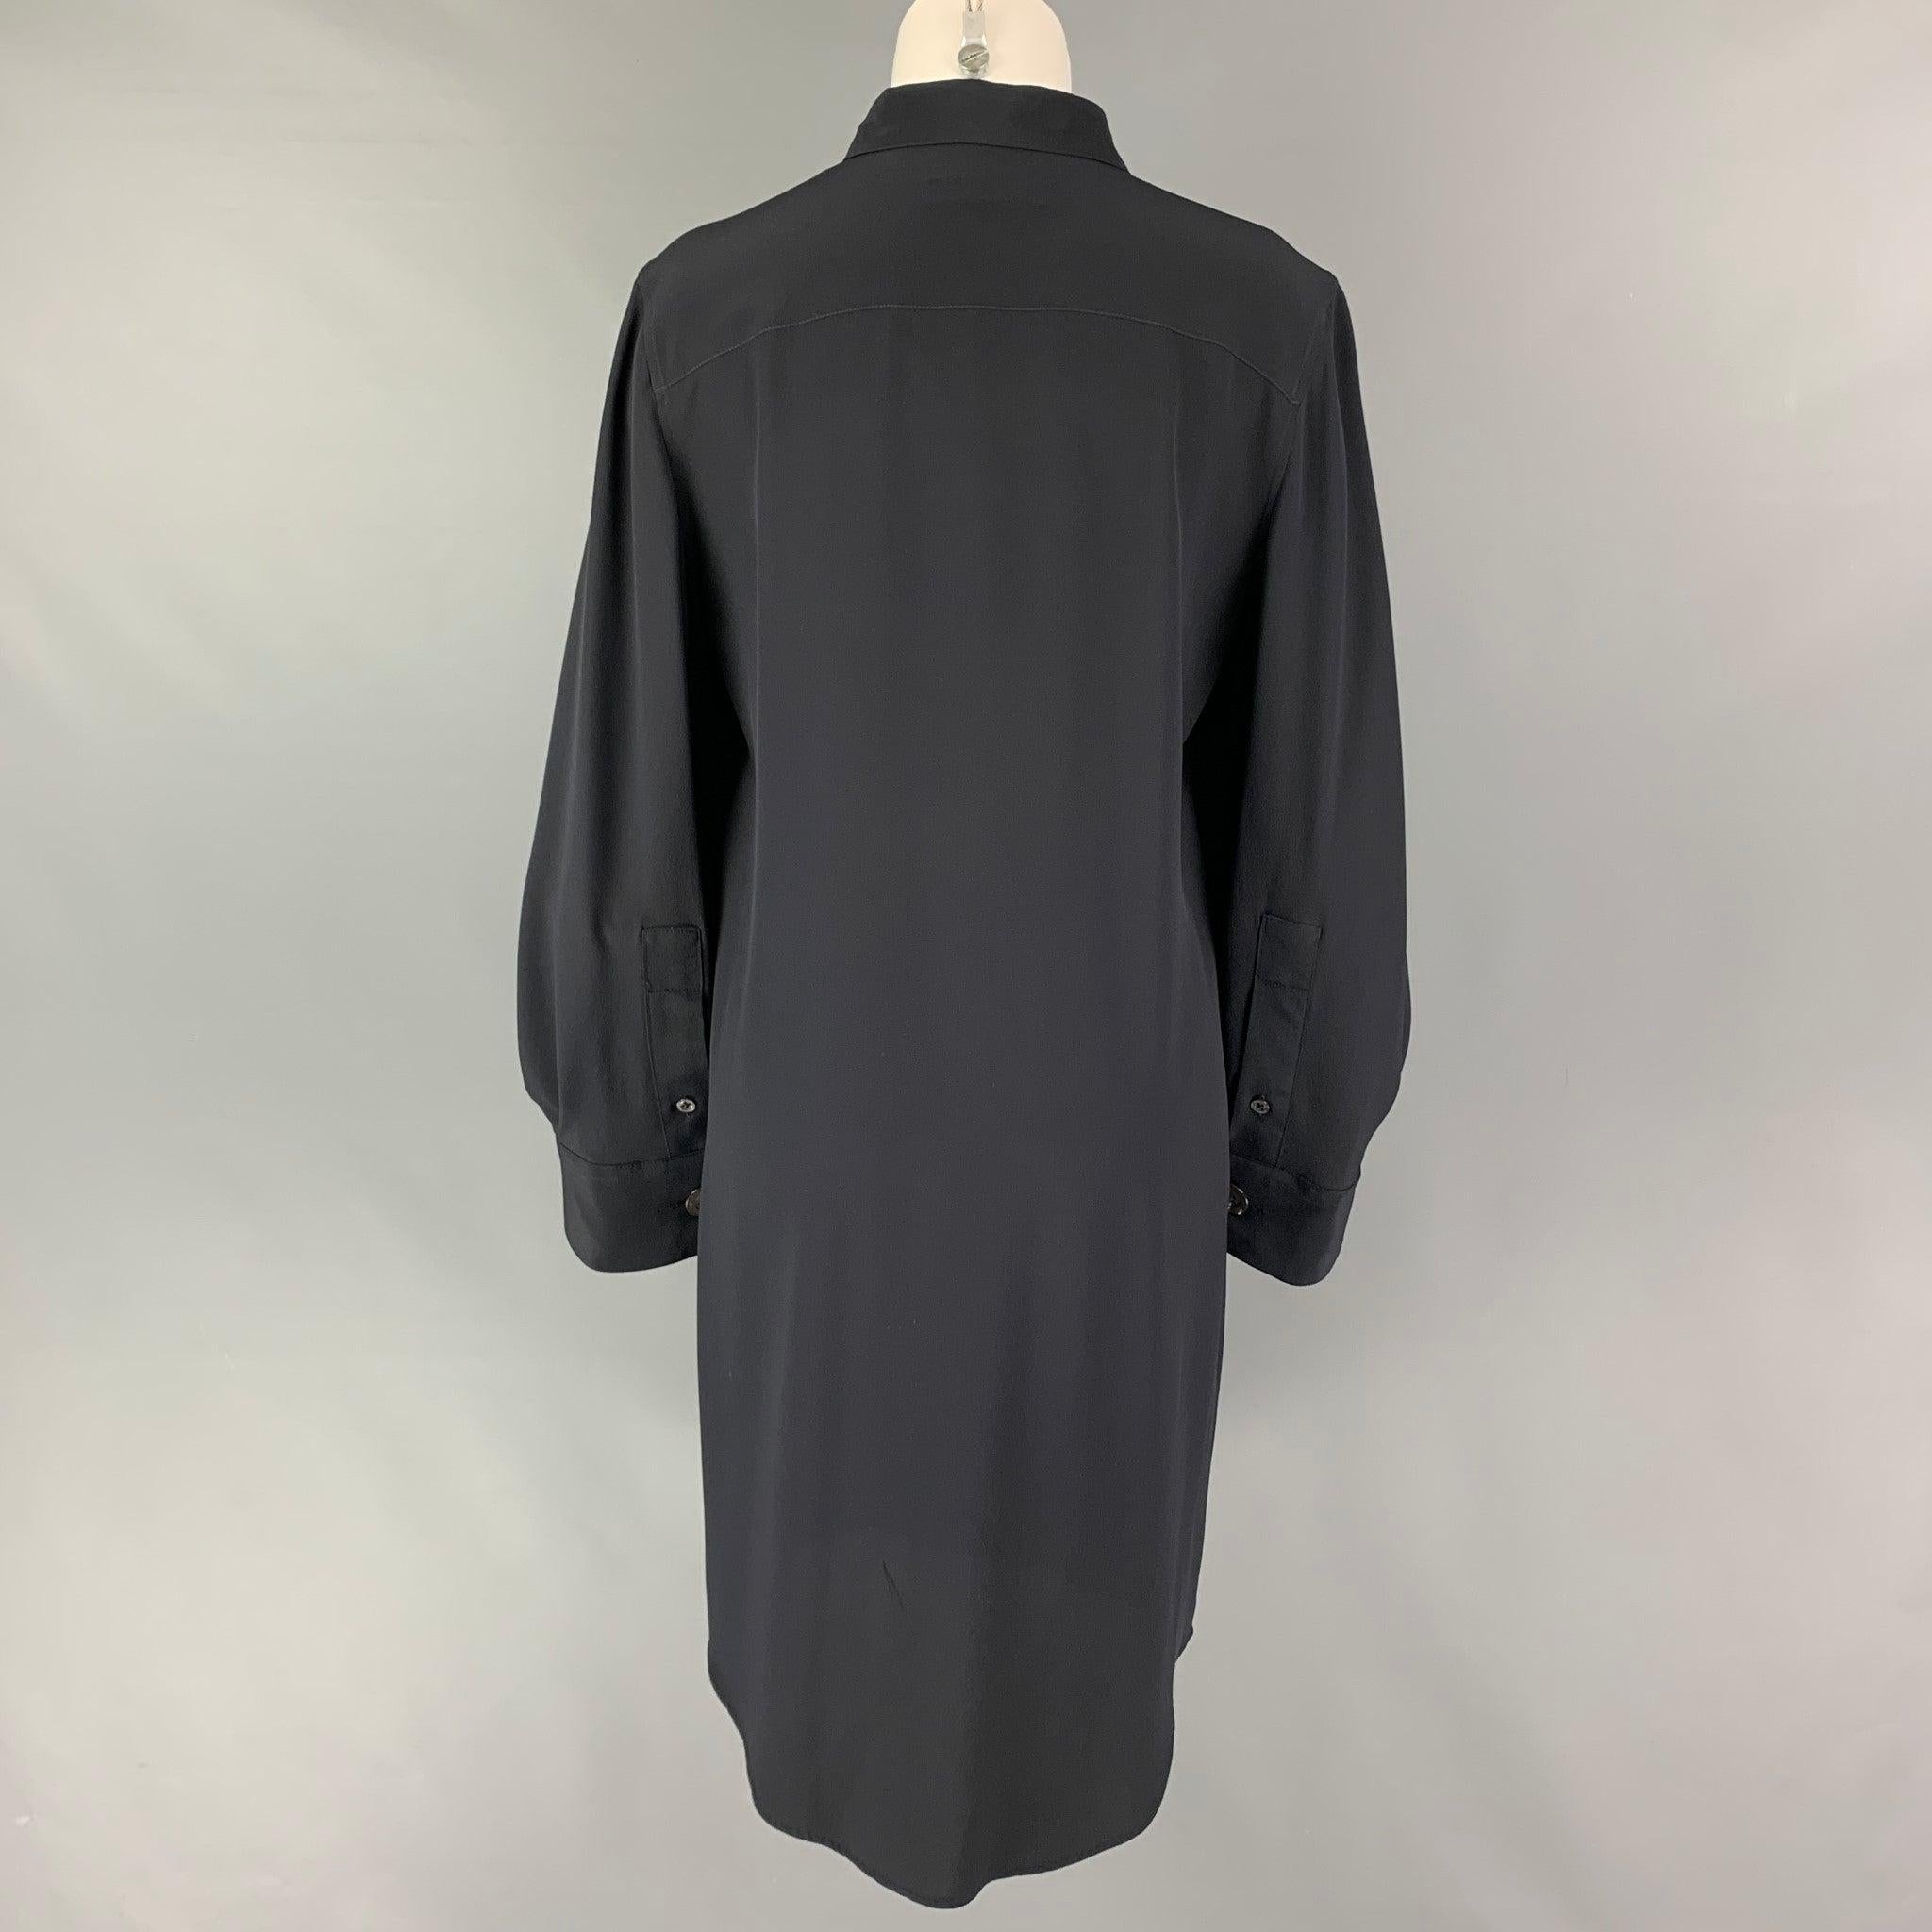 VIKTOR & ROLF Size 10 Black Silk Dress In Good Condition For Sale In San Francisco, CA